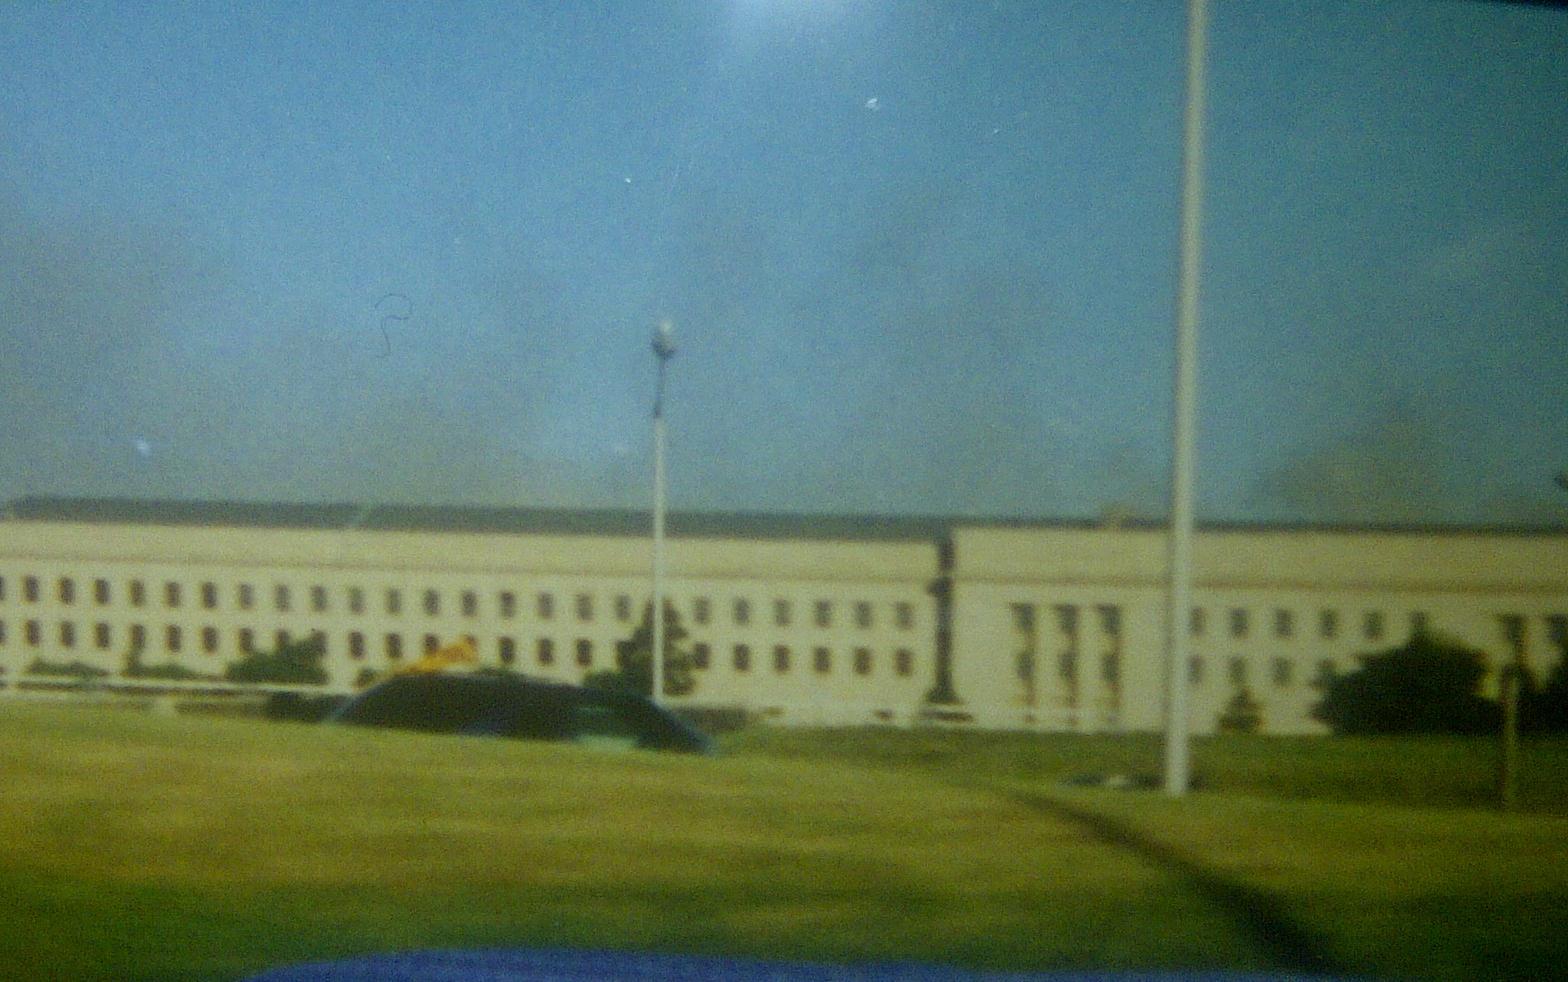 The Pentagon as smoke billows after the crash of Flight 77 Photo Credit: Melissa DeCastro